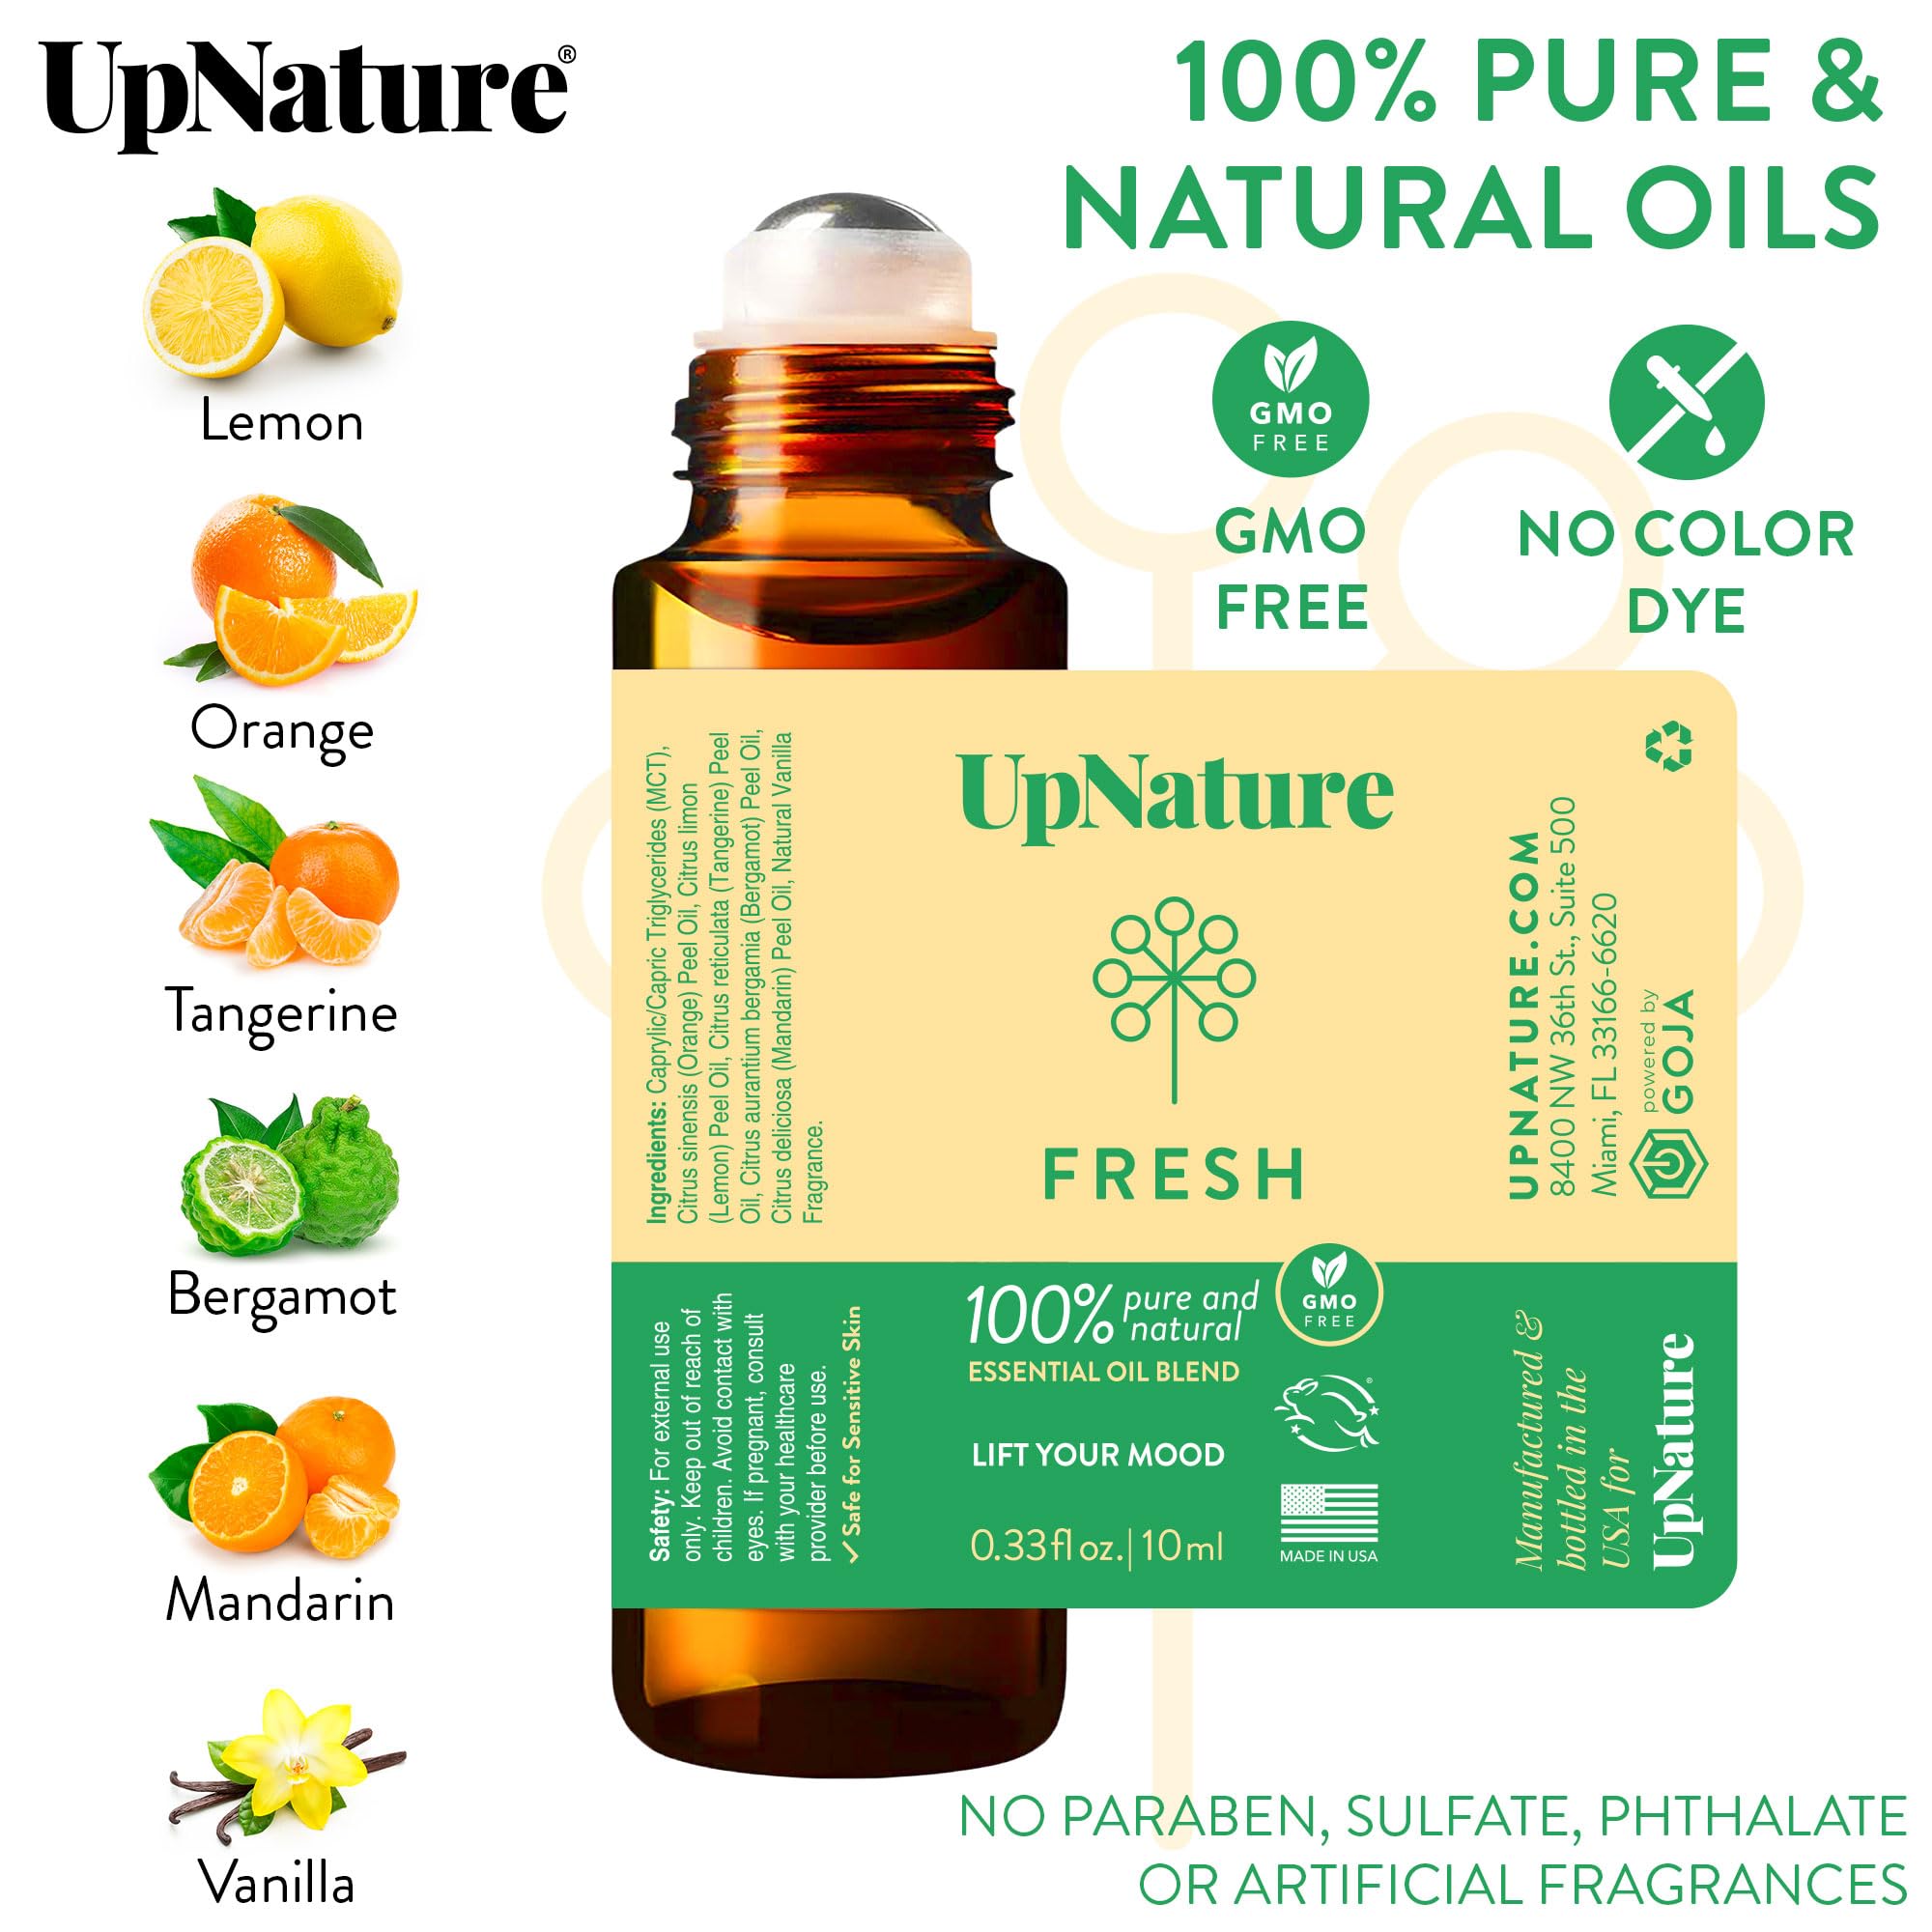 UpNature Fresh Citrus Essential Oil Roll On - 0.33 Fluid Ounces - Boost Energy, Improve Focus, Calm Mood, Promote Healthy Skin, Safety Precautions